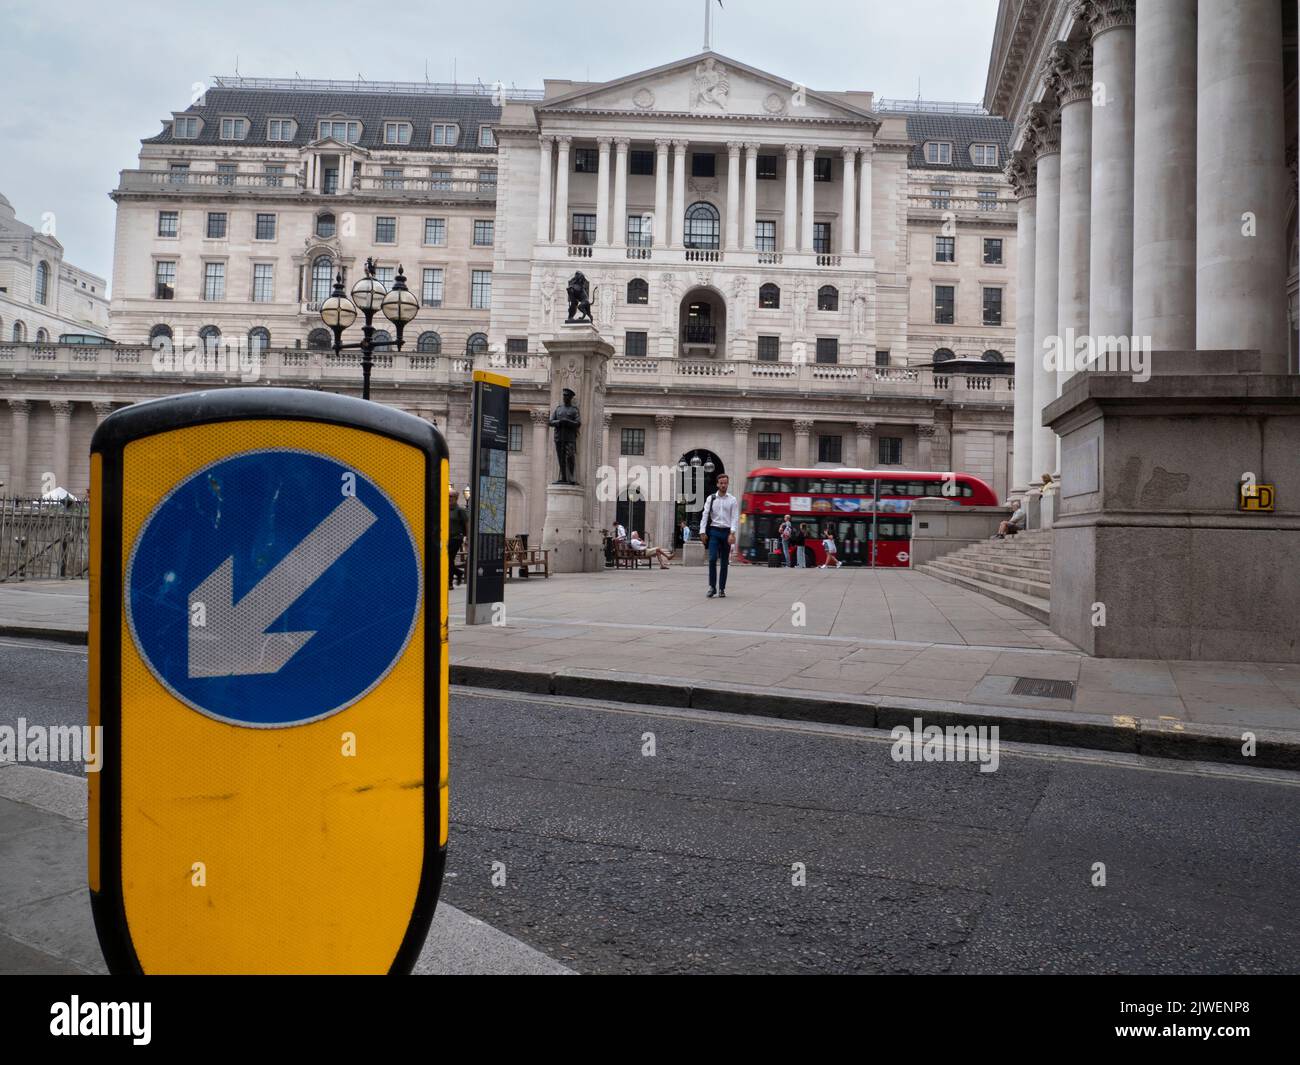 City of London UK. Bank of England building Threadneedle Street London with keep left sign in road Stock Photo